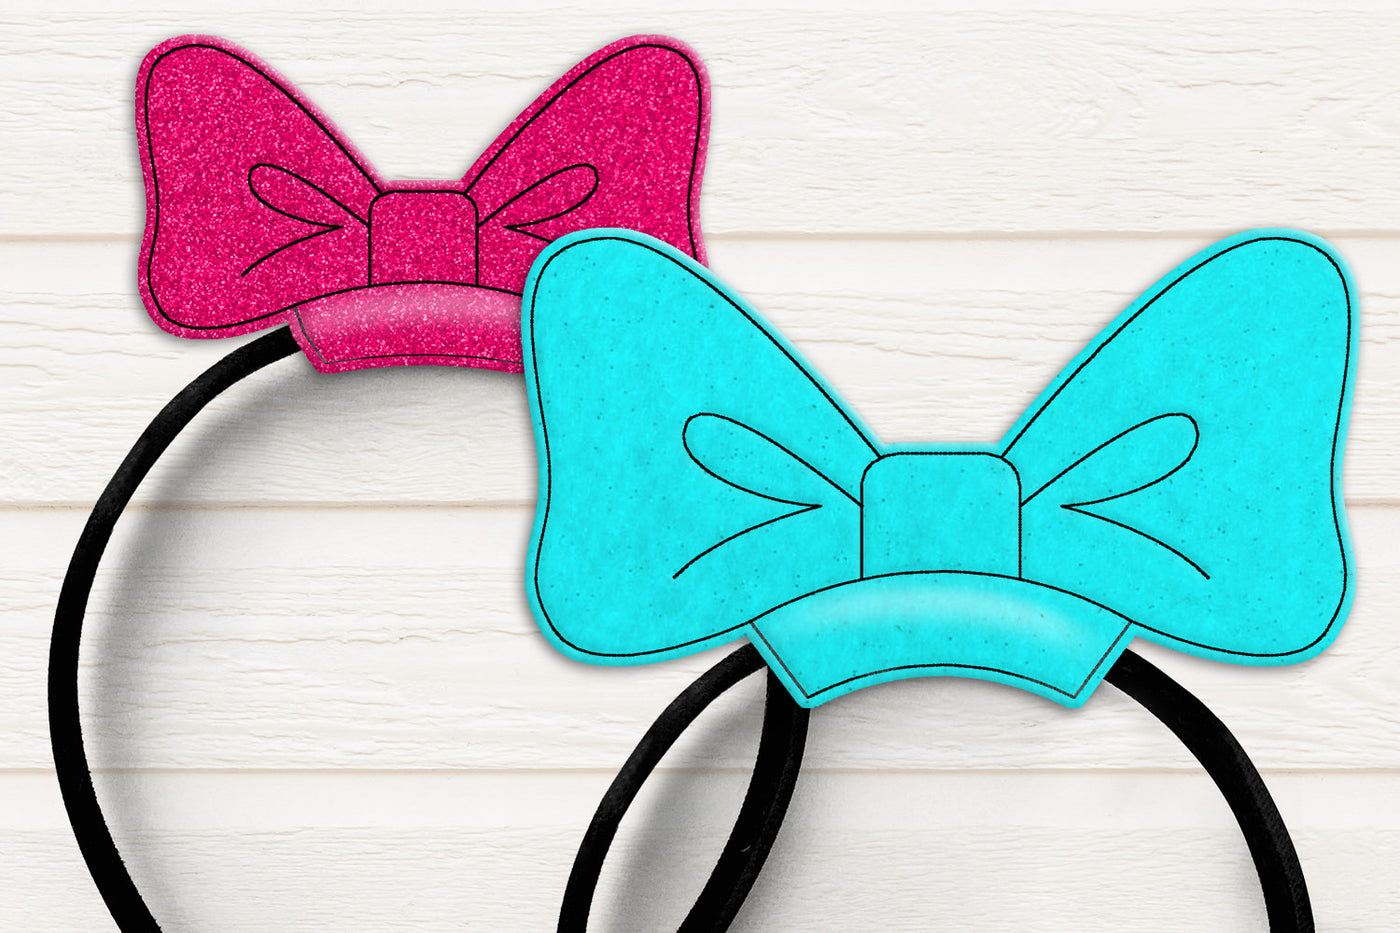 Large and Petite costume bow headband ITH embroidery